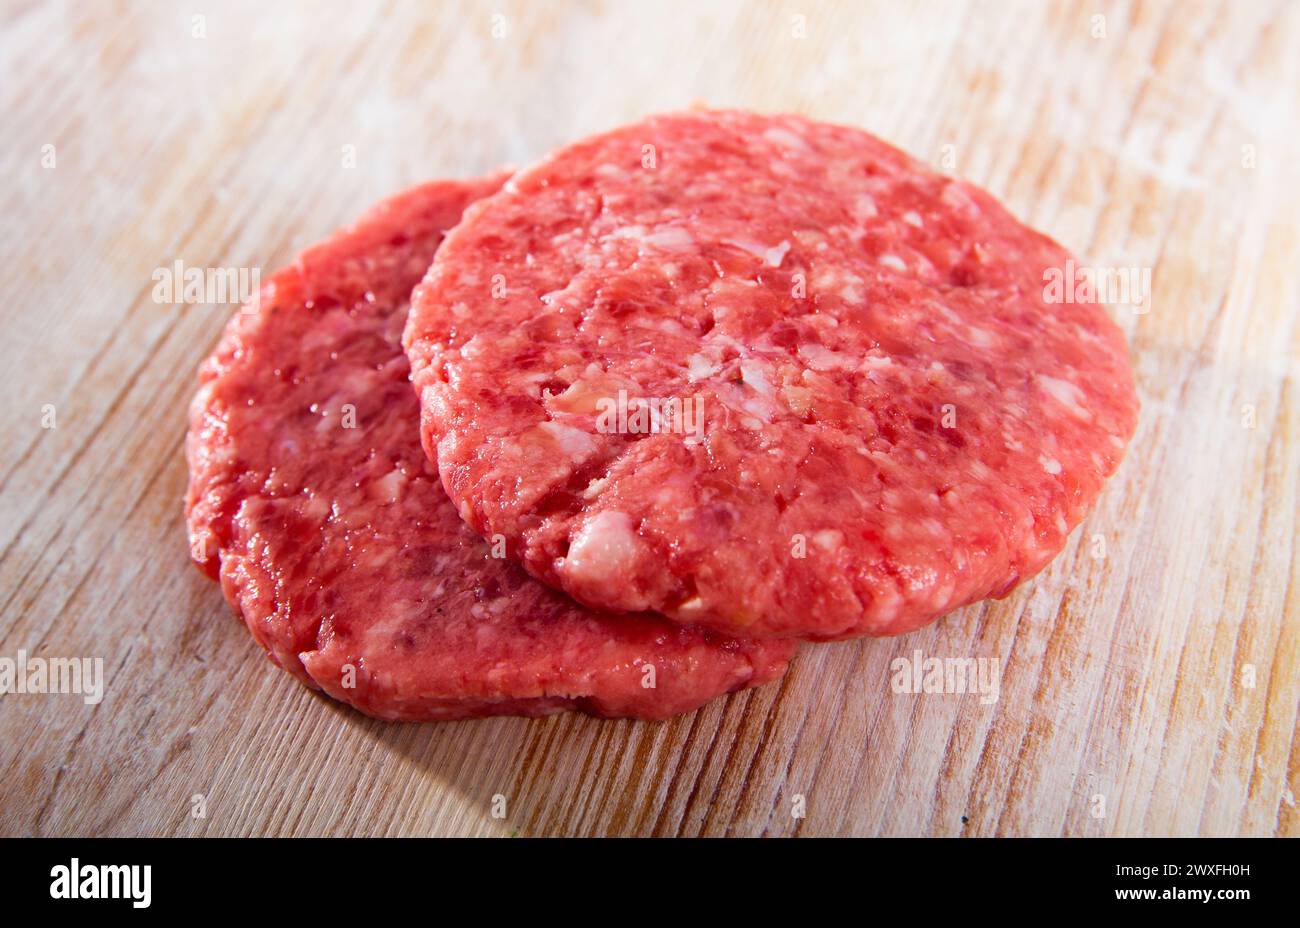 Top view of raw cutlet on wooden table. High quality photo Stock Photo